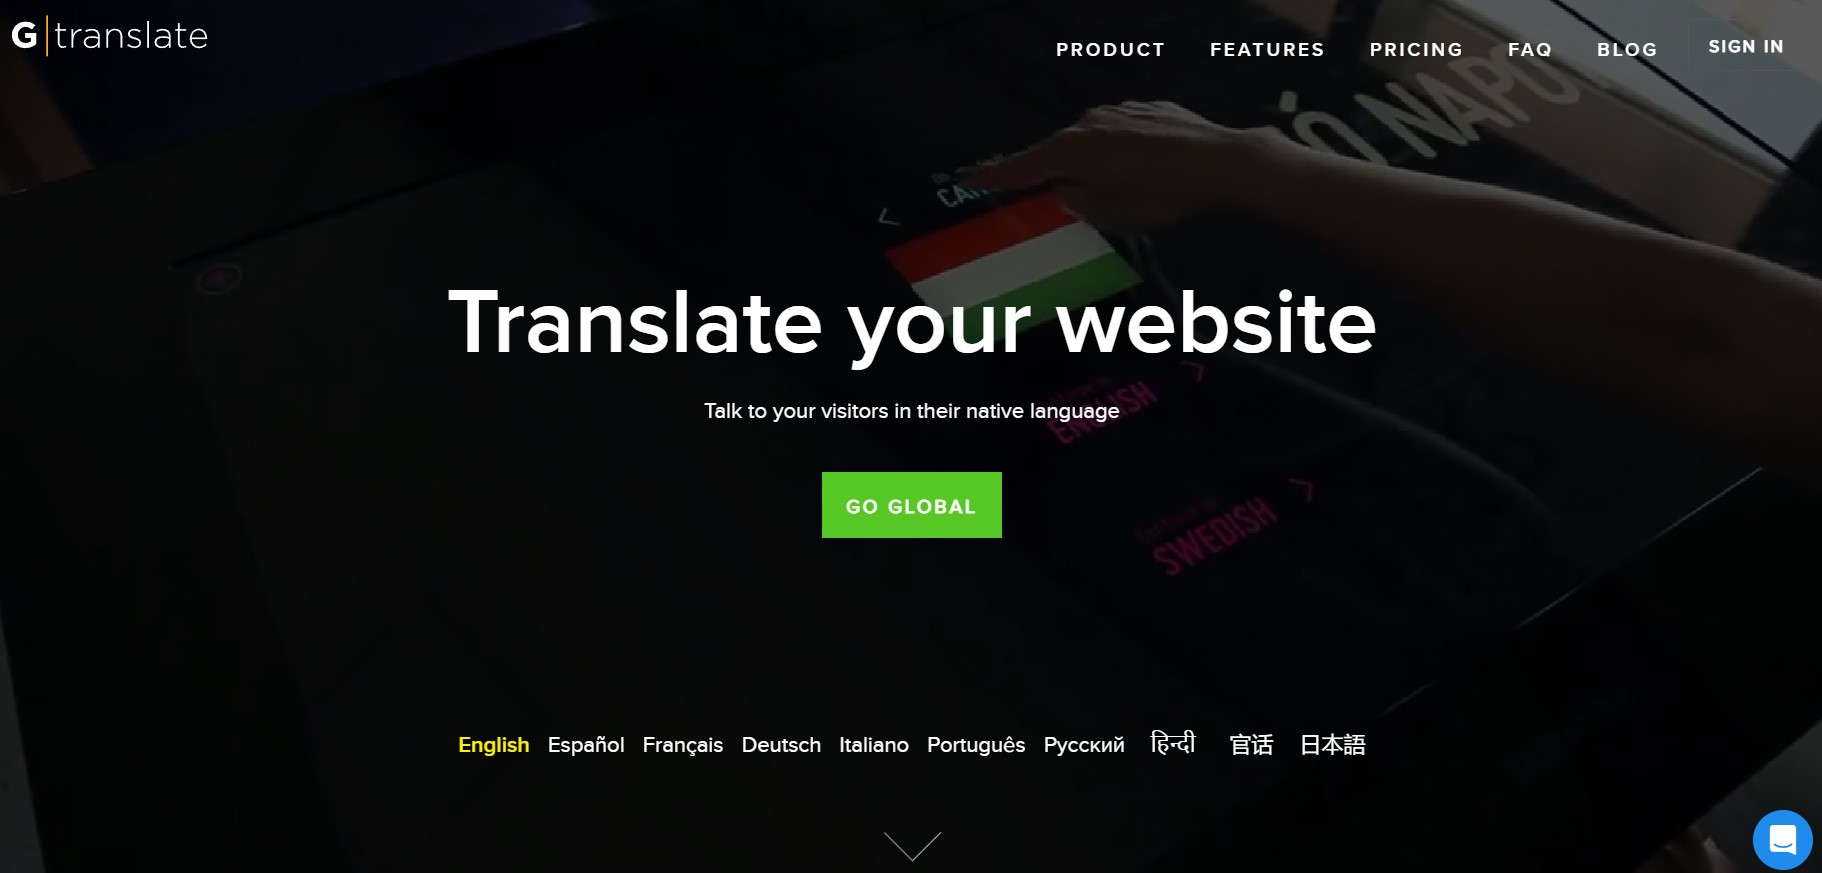 Gtranslate Translates Your Website Into Various Languages